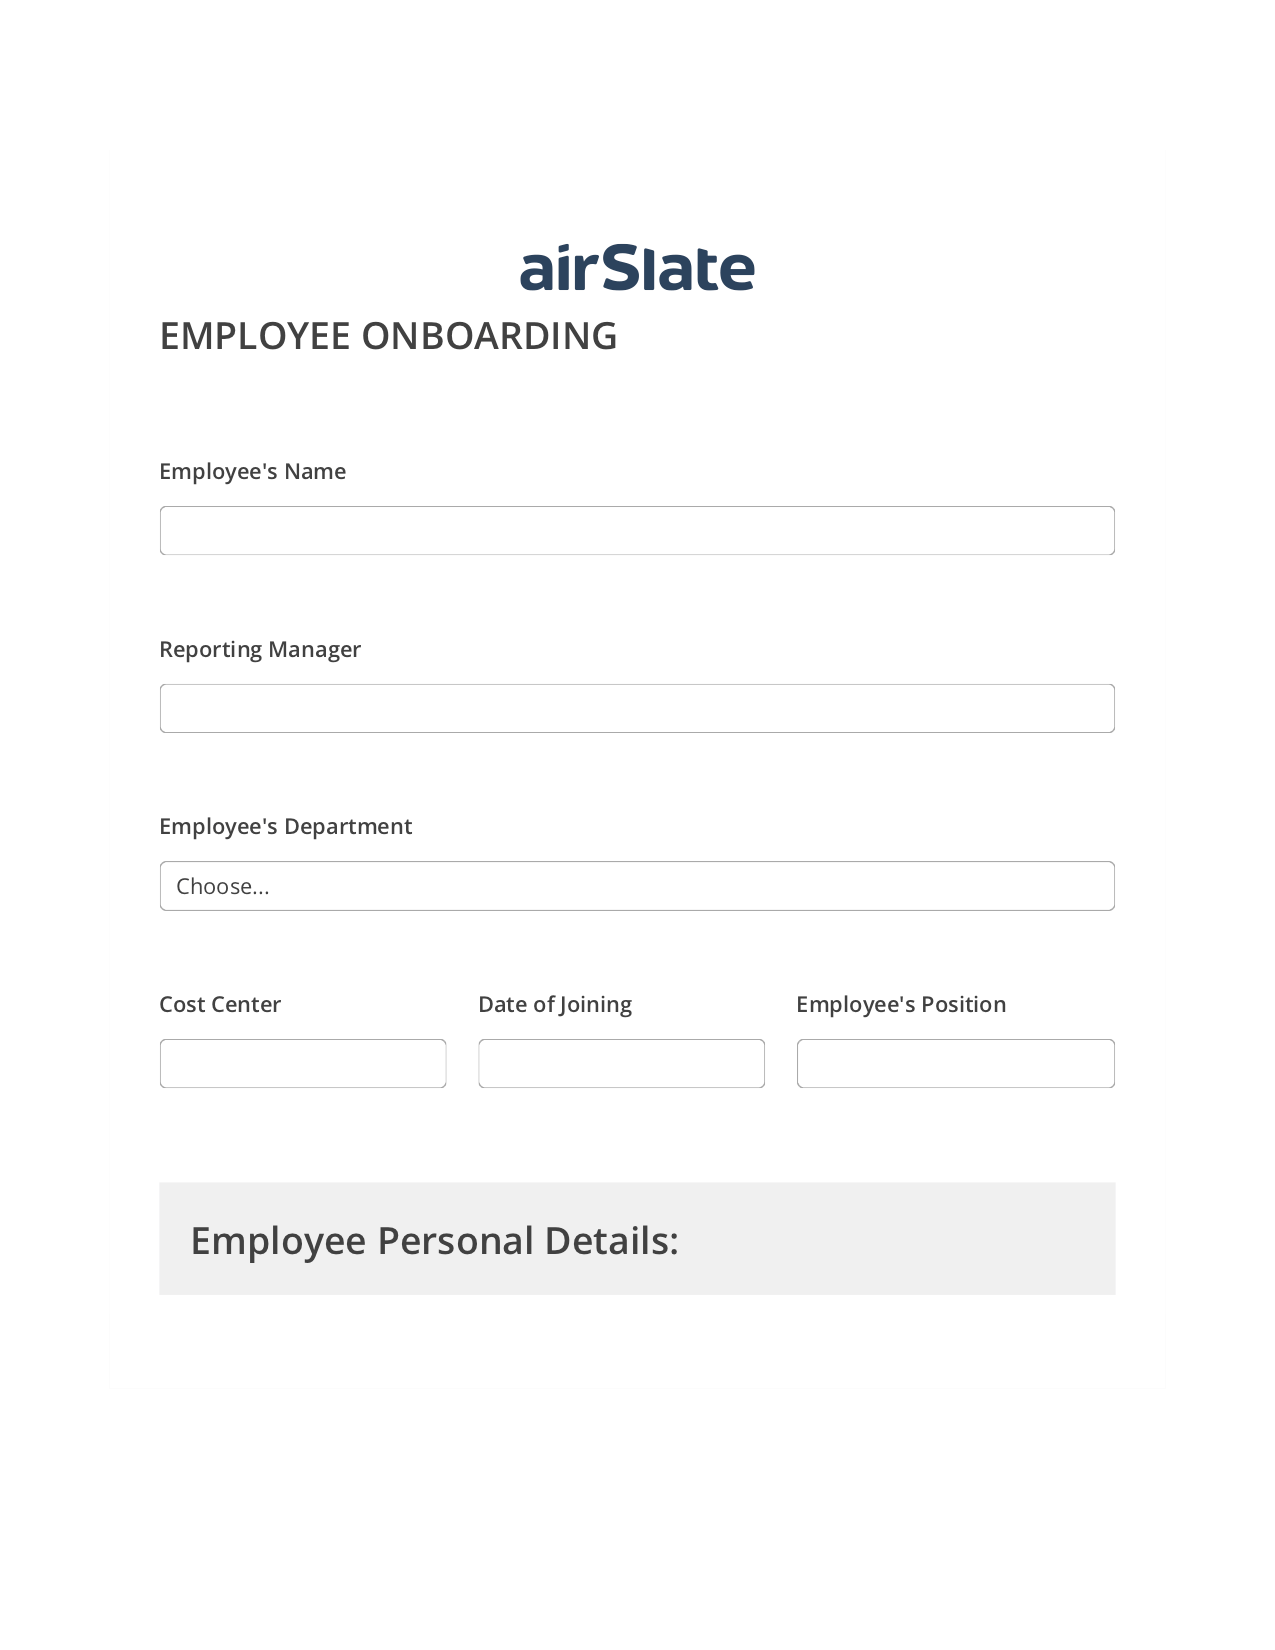 Employee Onboarding Workflow Pre-fill from Google Sheet Dropdown Options Bot, Google Cloud Print Bot, Archive to Box Bot